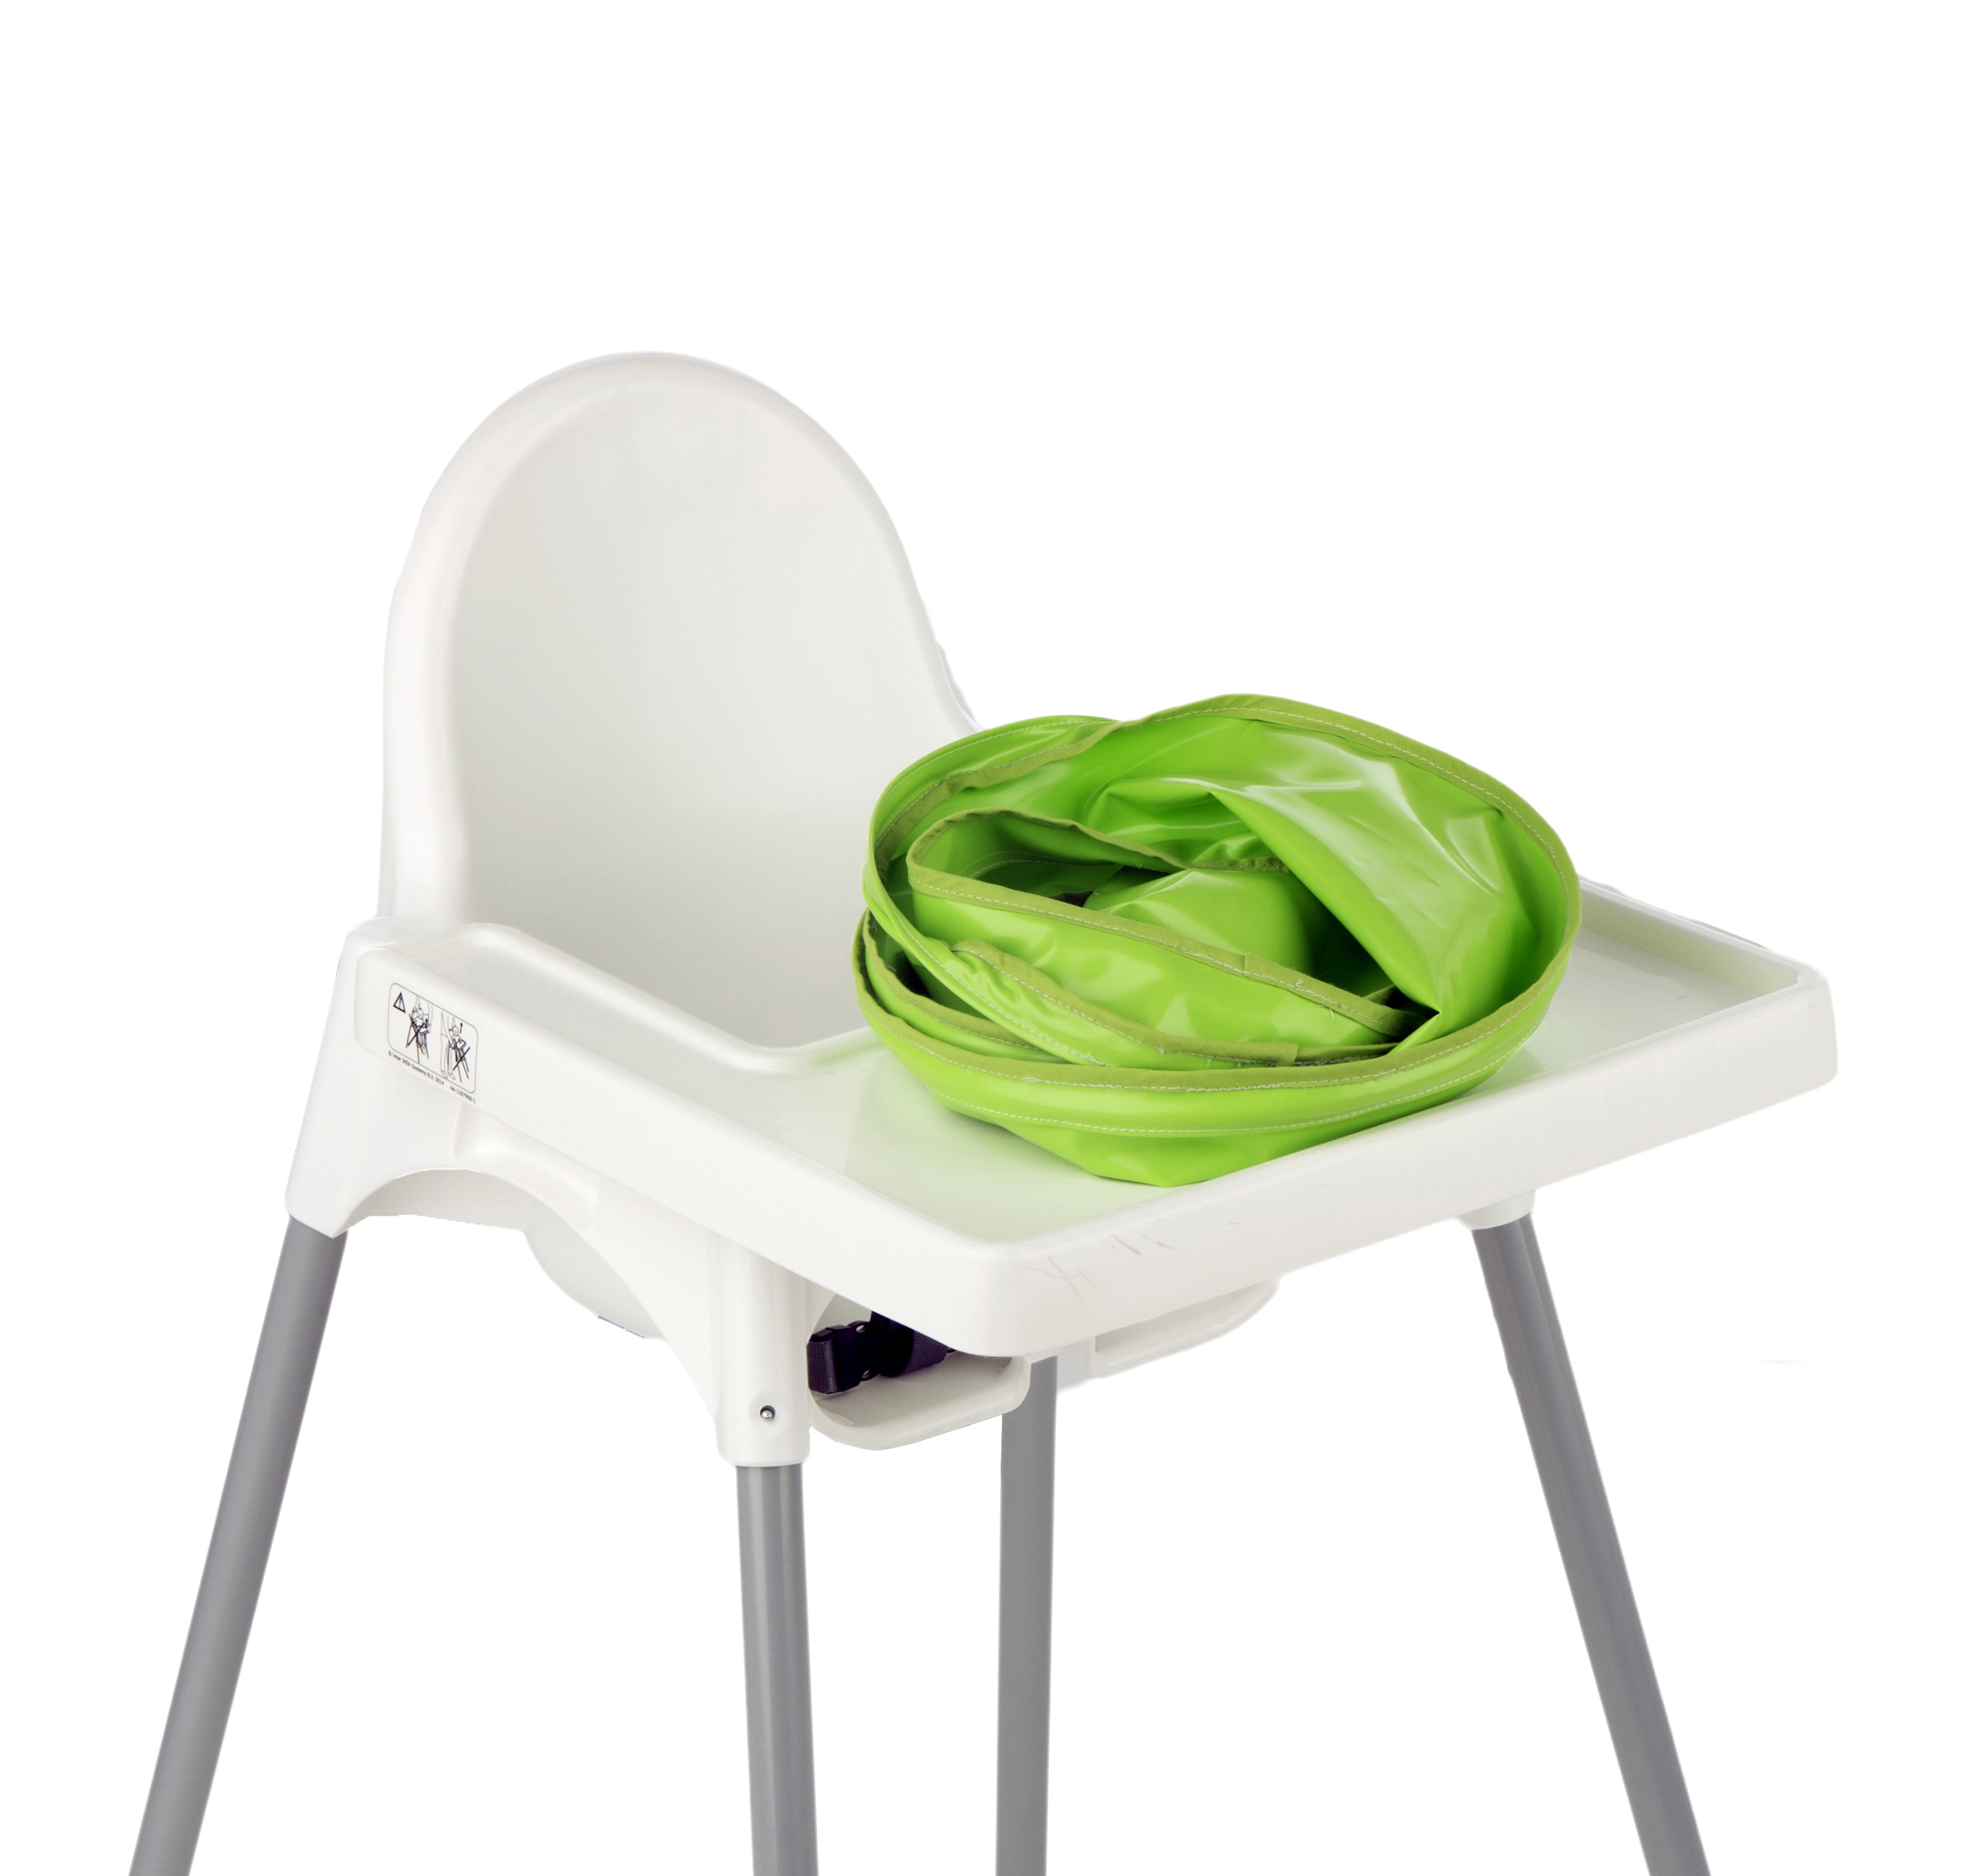 Tidy Tot All-in-One Bib and Tray Kit. Unisex. One Size fits 6 Months – 2  Years. Award Winning Weaning Aid